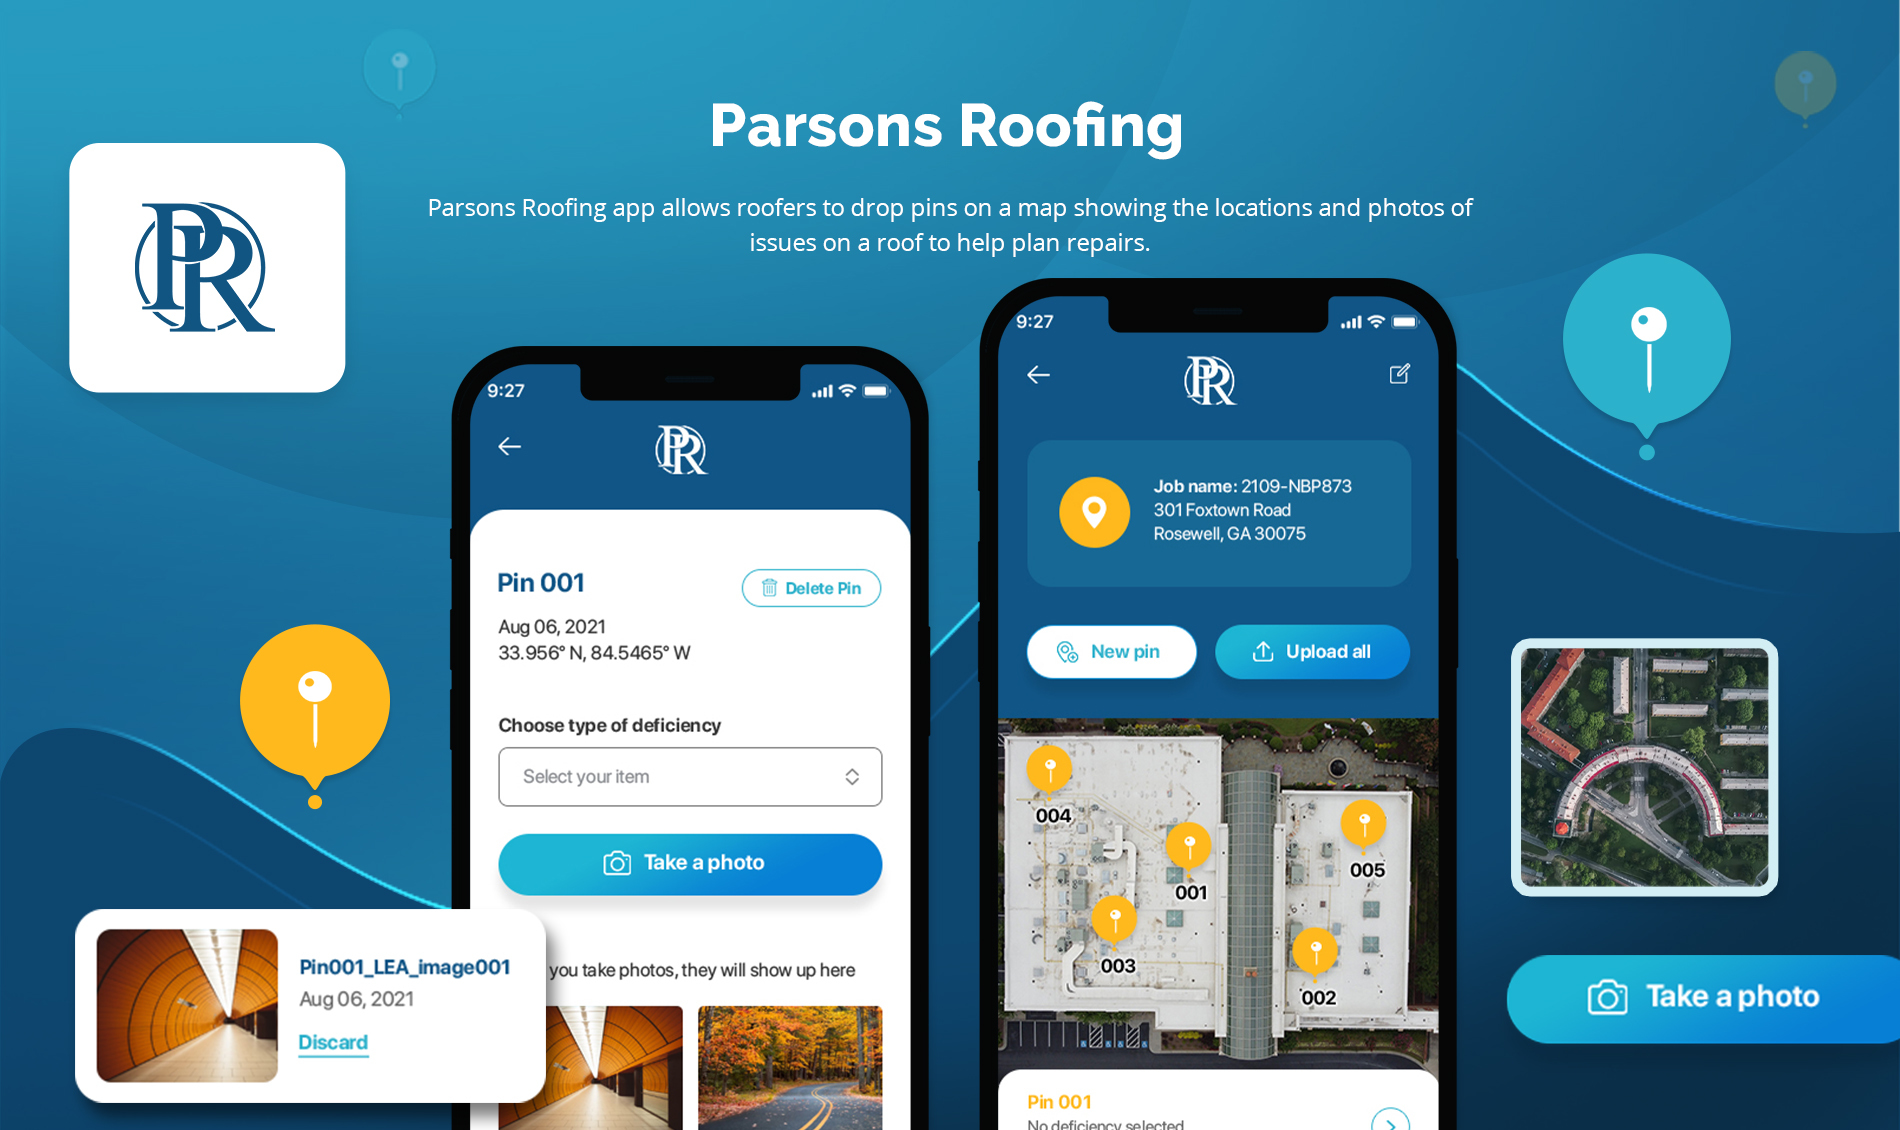 Parsons Roofing